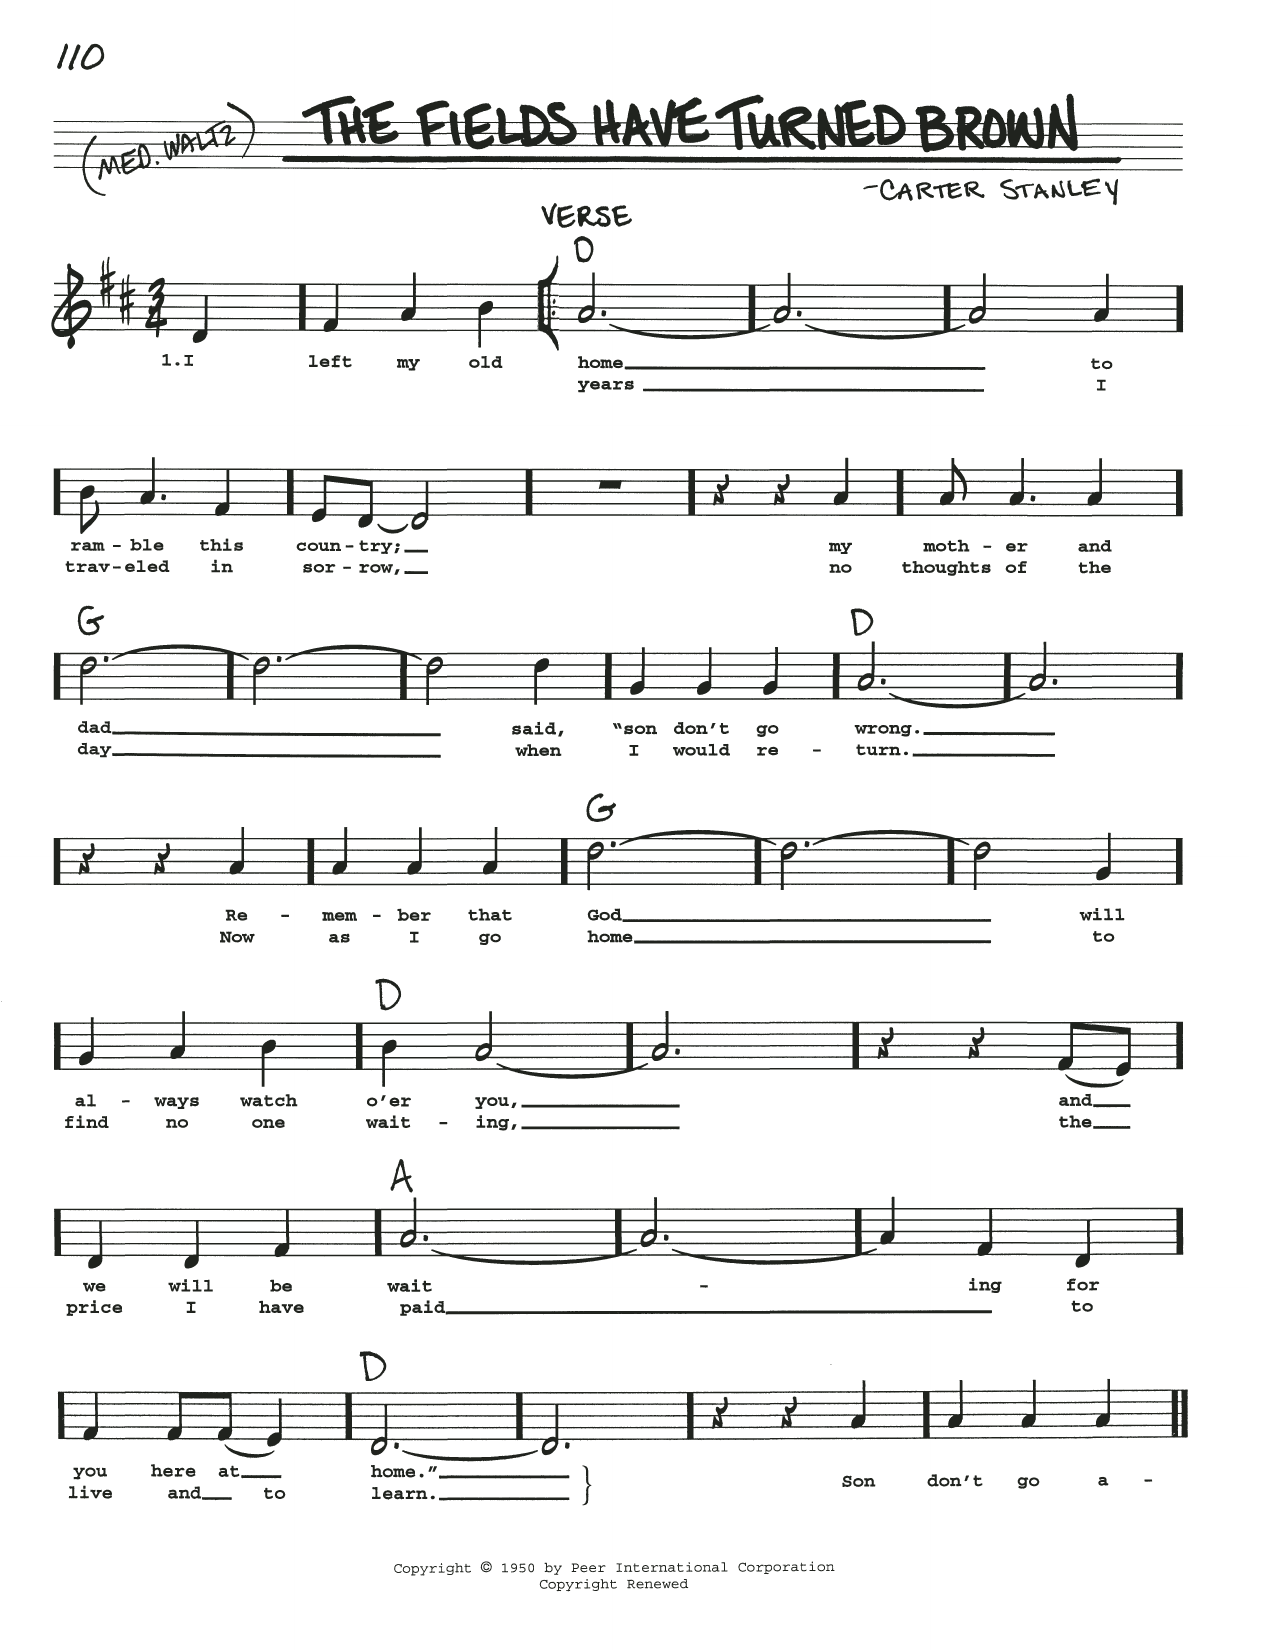 Download Stanley Carter The Fields Have Turned Brown Sheet Music